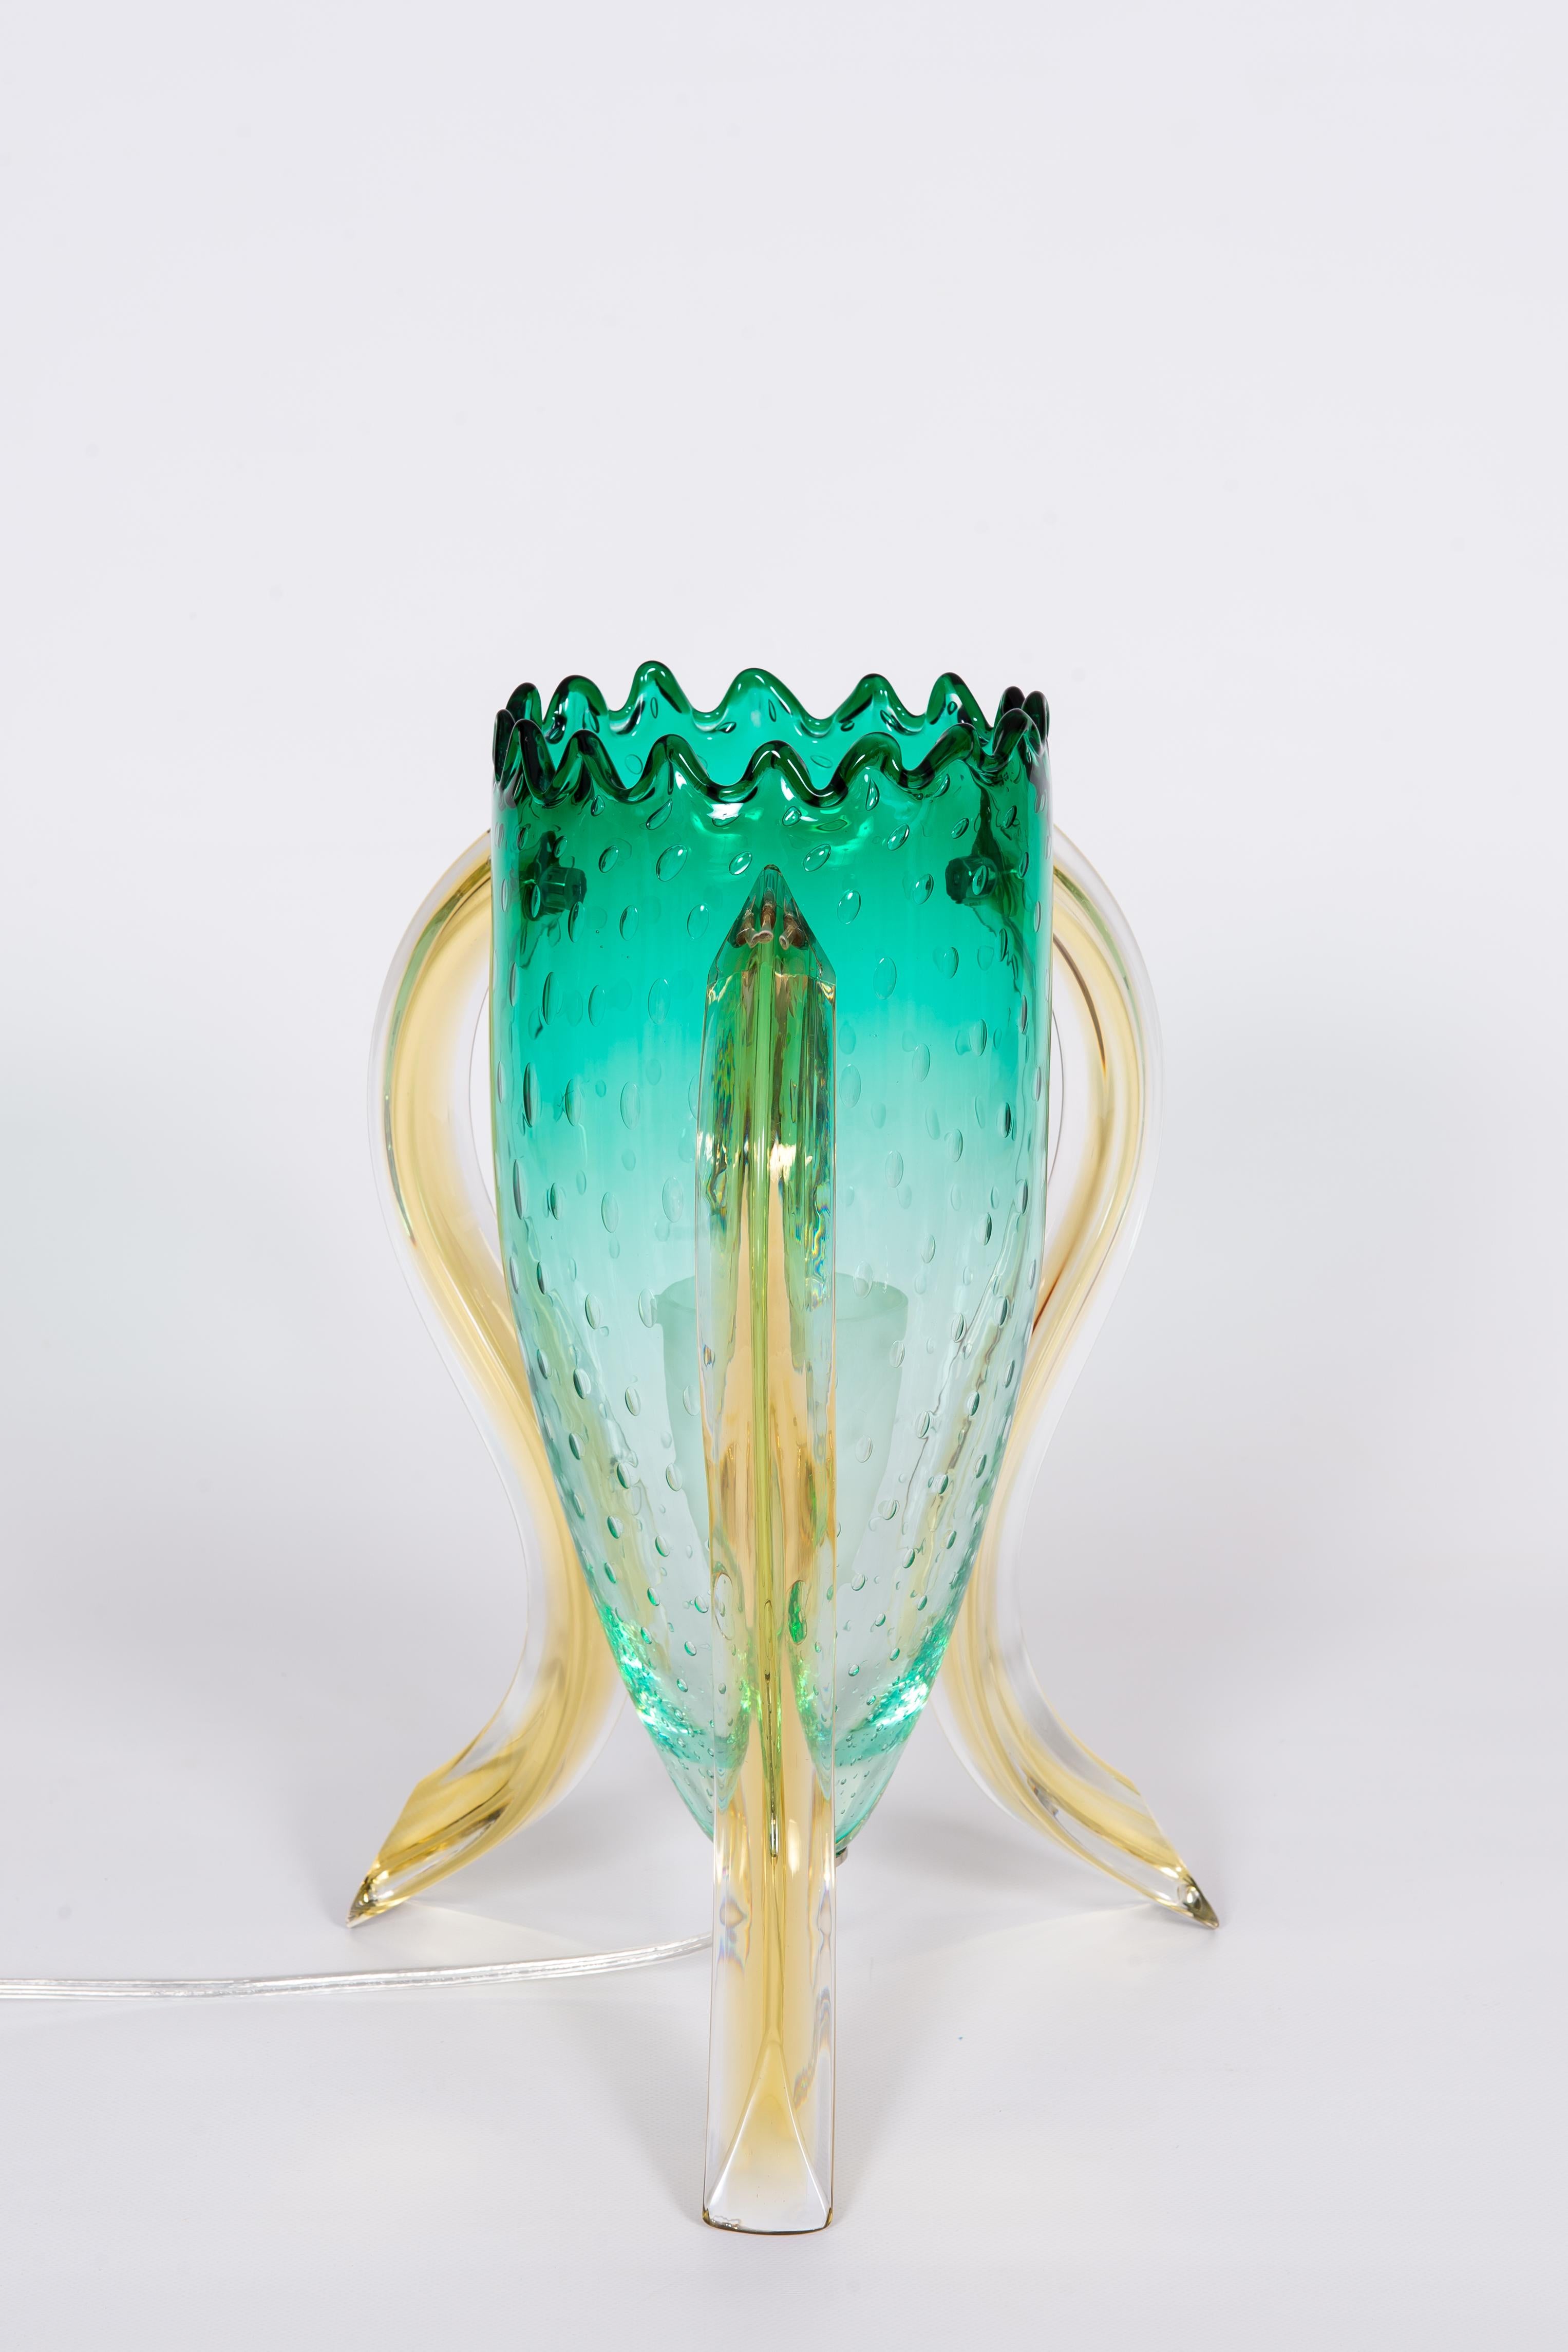 Astonished and unique limited edition, Italian Pair of Table Lamps in Blown Murano Glass Green and Amber, 1990s. Limited Edition.
This astonished pair of table lamp, is a unique design, by our Gallery, Vintage Murano Gallery. They are made up of a